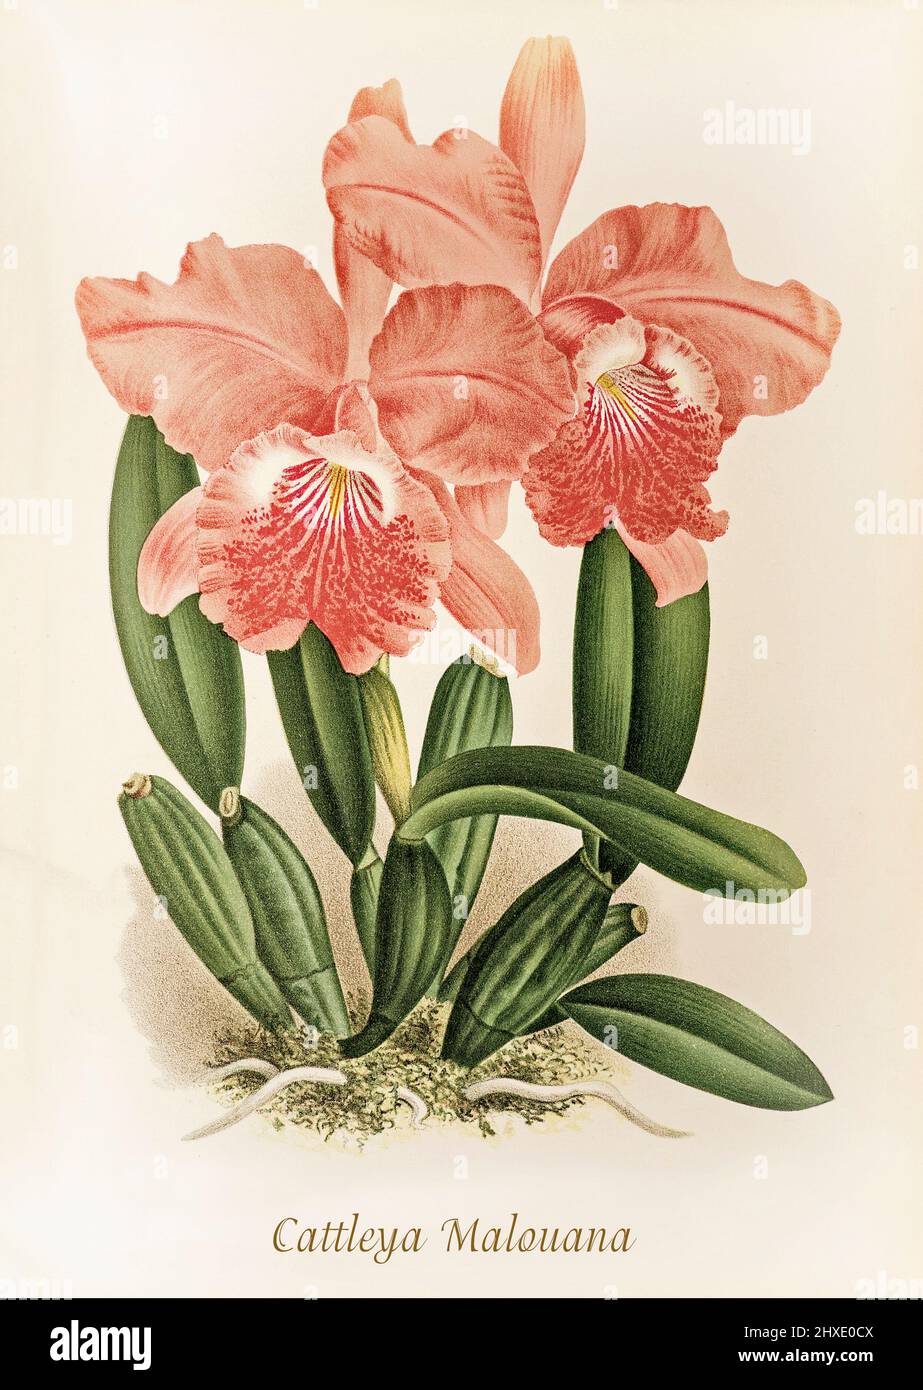 Cattleya malouana, from Venezuela, Colombia, Ecuador and northern coastal Peru that is found at elevations of 10 to 1500 meters in seasonally dry, coastal forests. From Iconographie des Orchidees, a magazine of botanical illustrations published by Jean Jules Linden (1817-1898) was a Belgian botanist, explorer and horticulturist who specialised in orchids. Stock Photo